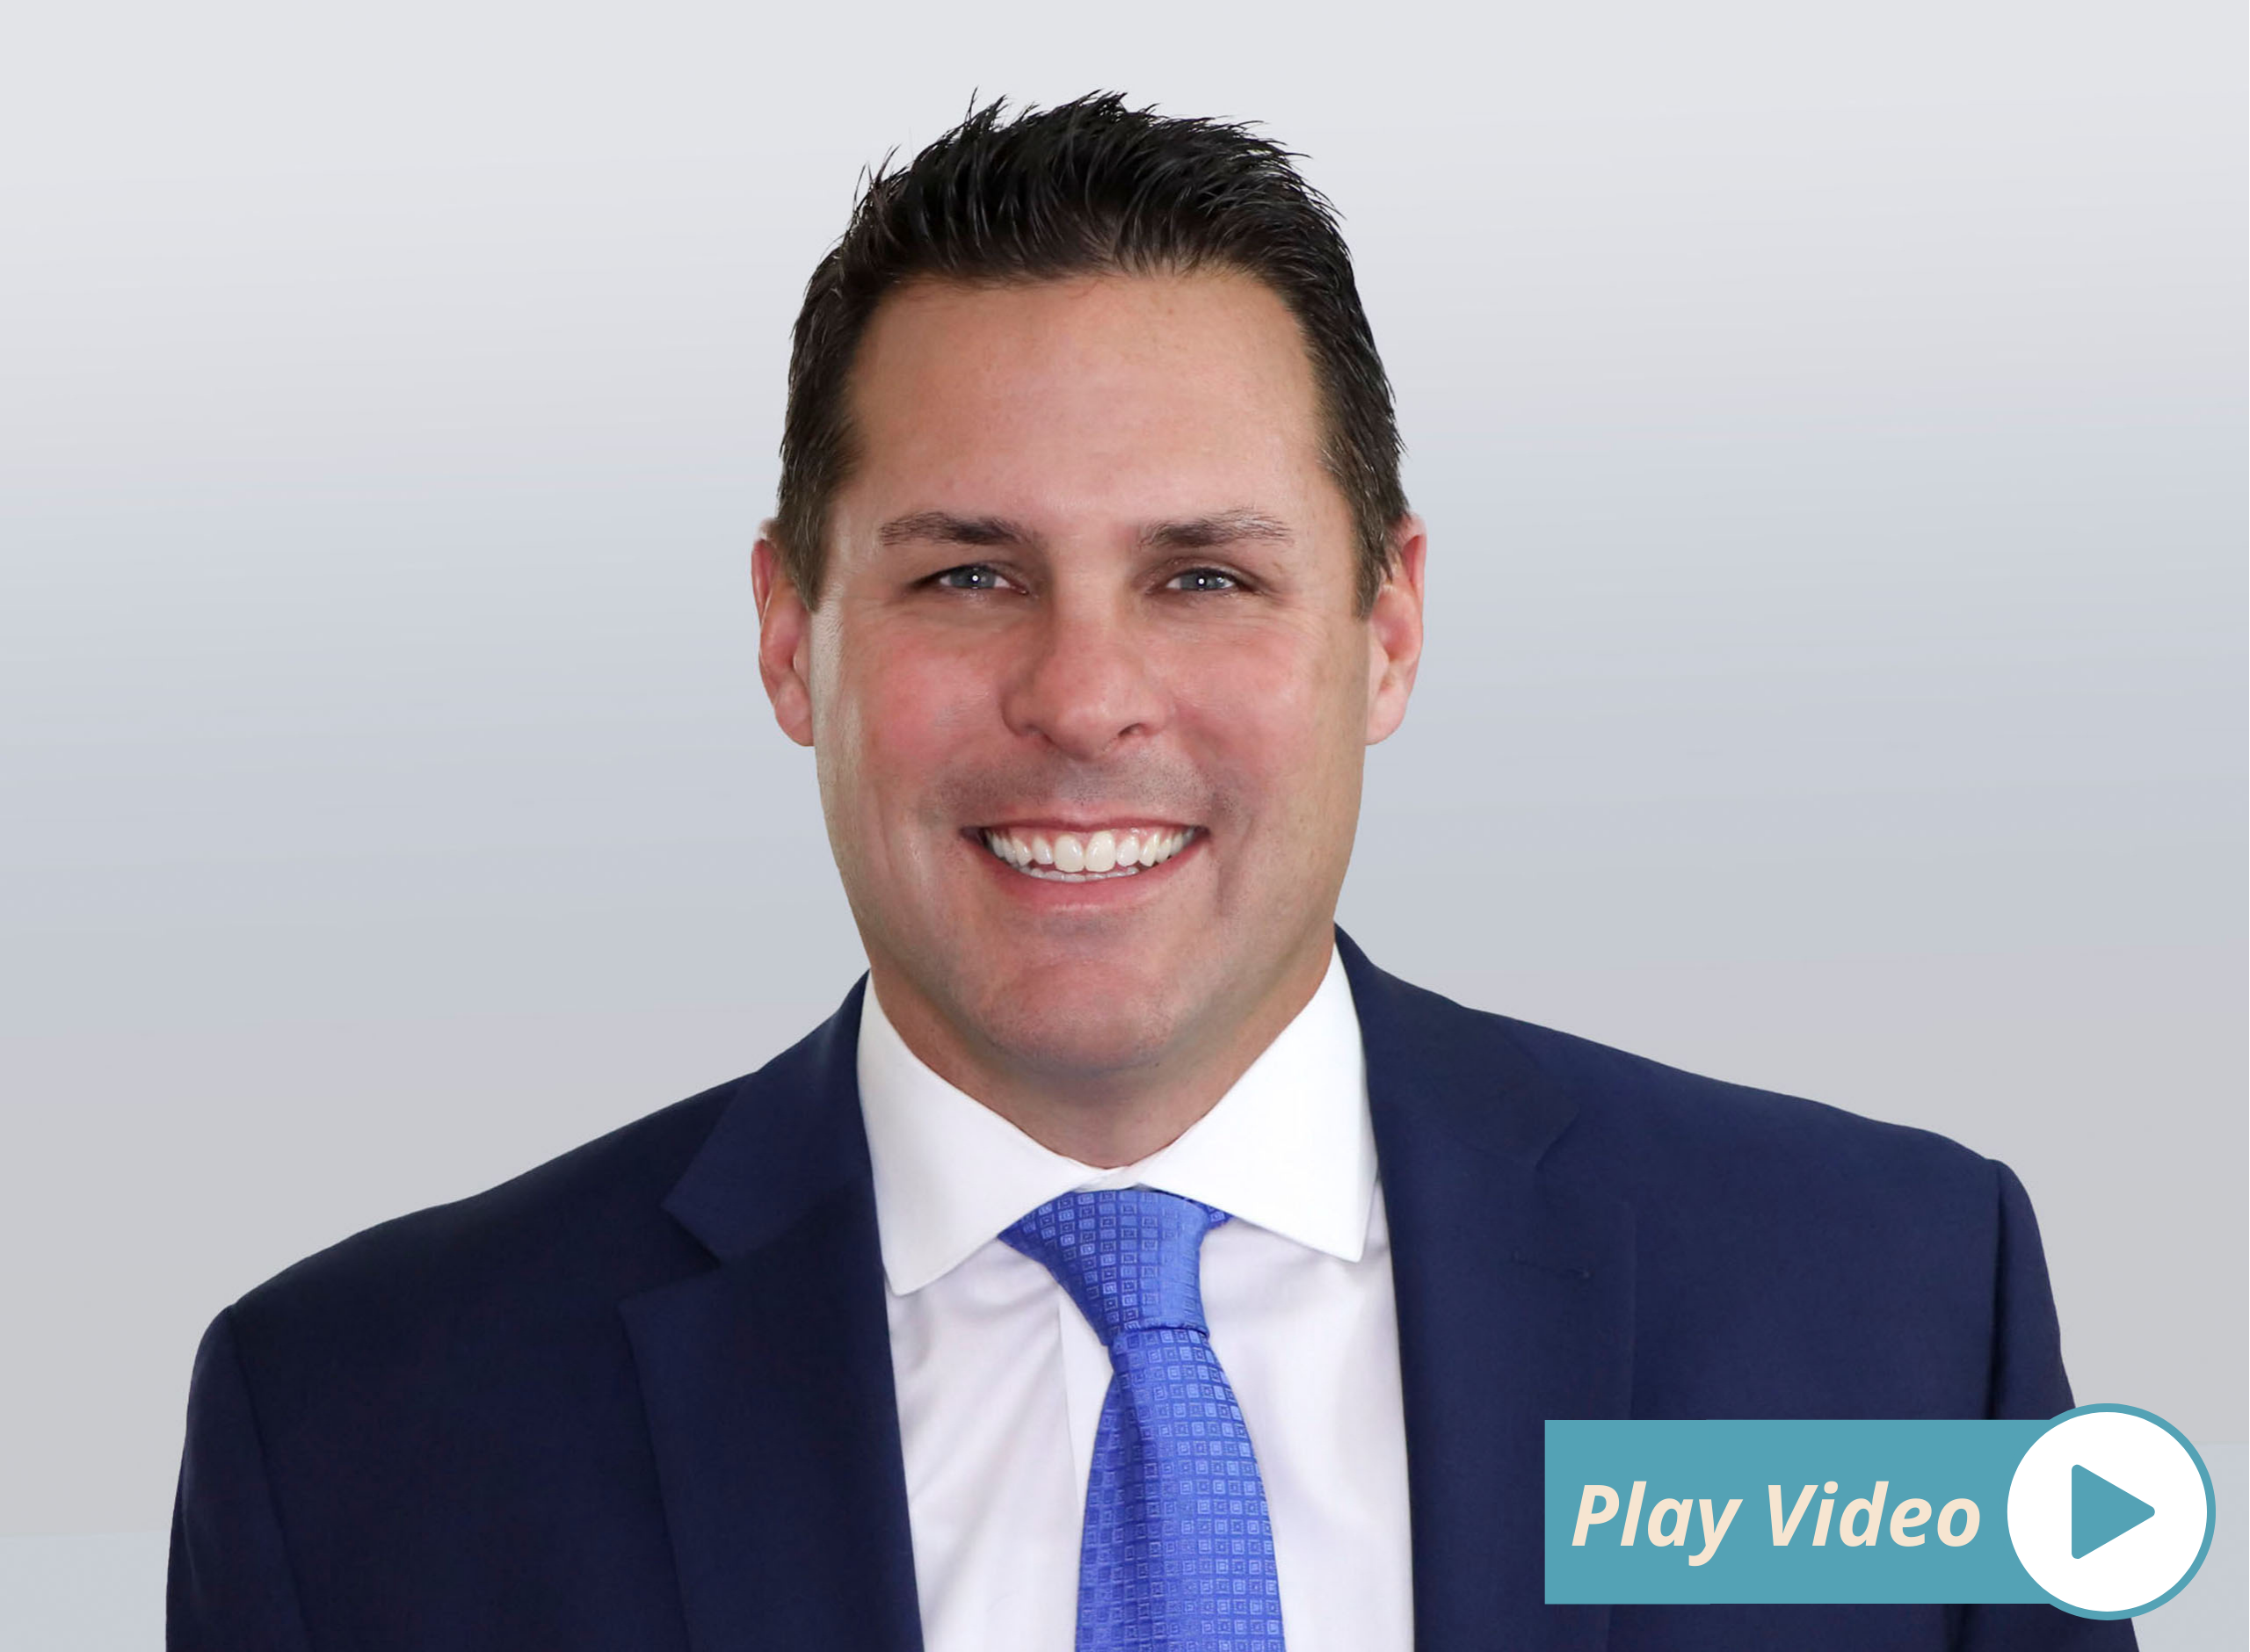 Gregory Reddock, Senior Vice President, CPA. Click to play a video introduction.